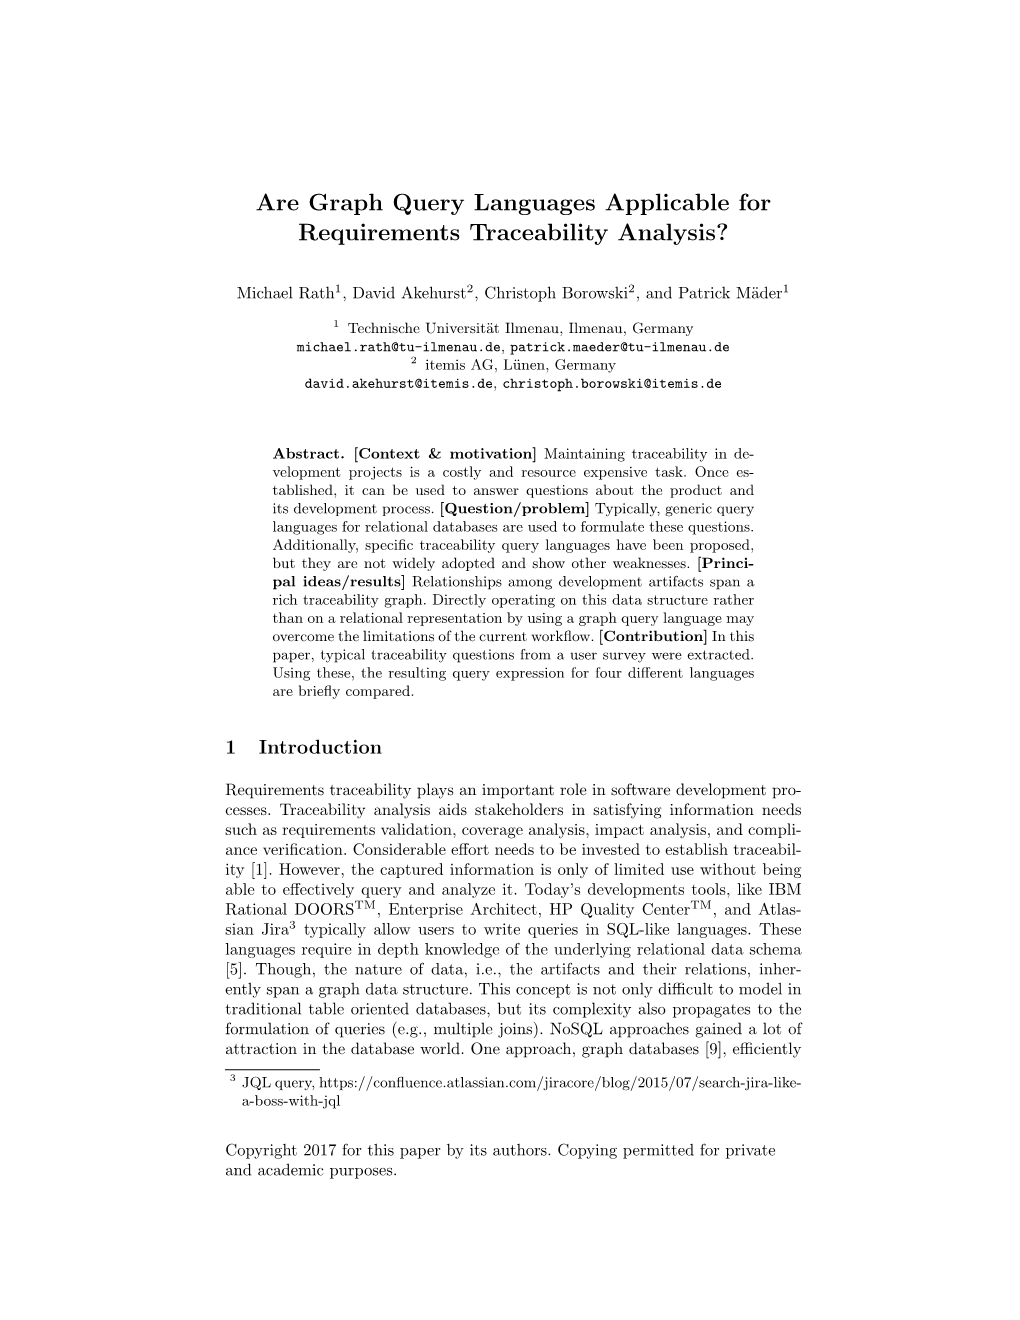 Are Graph Query Languages Applicable for Requirements Traceability Analysis?